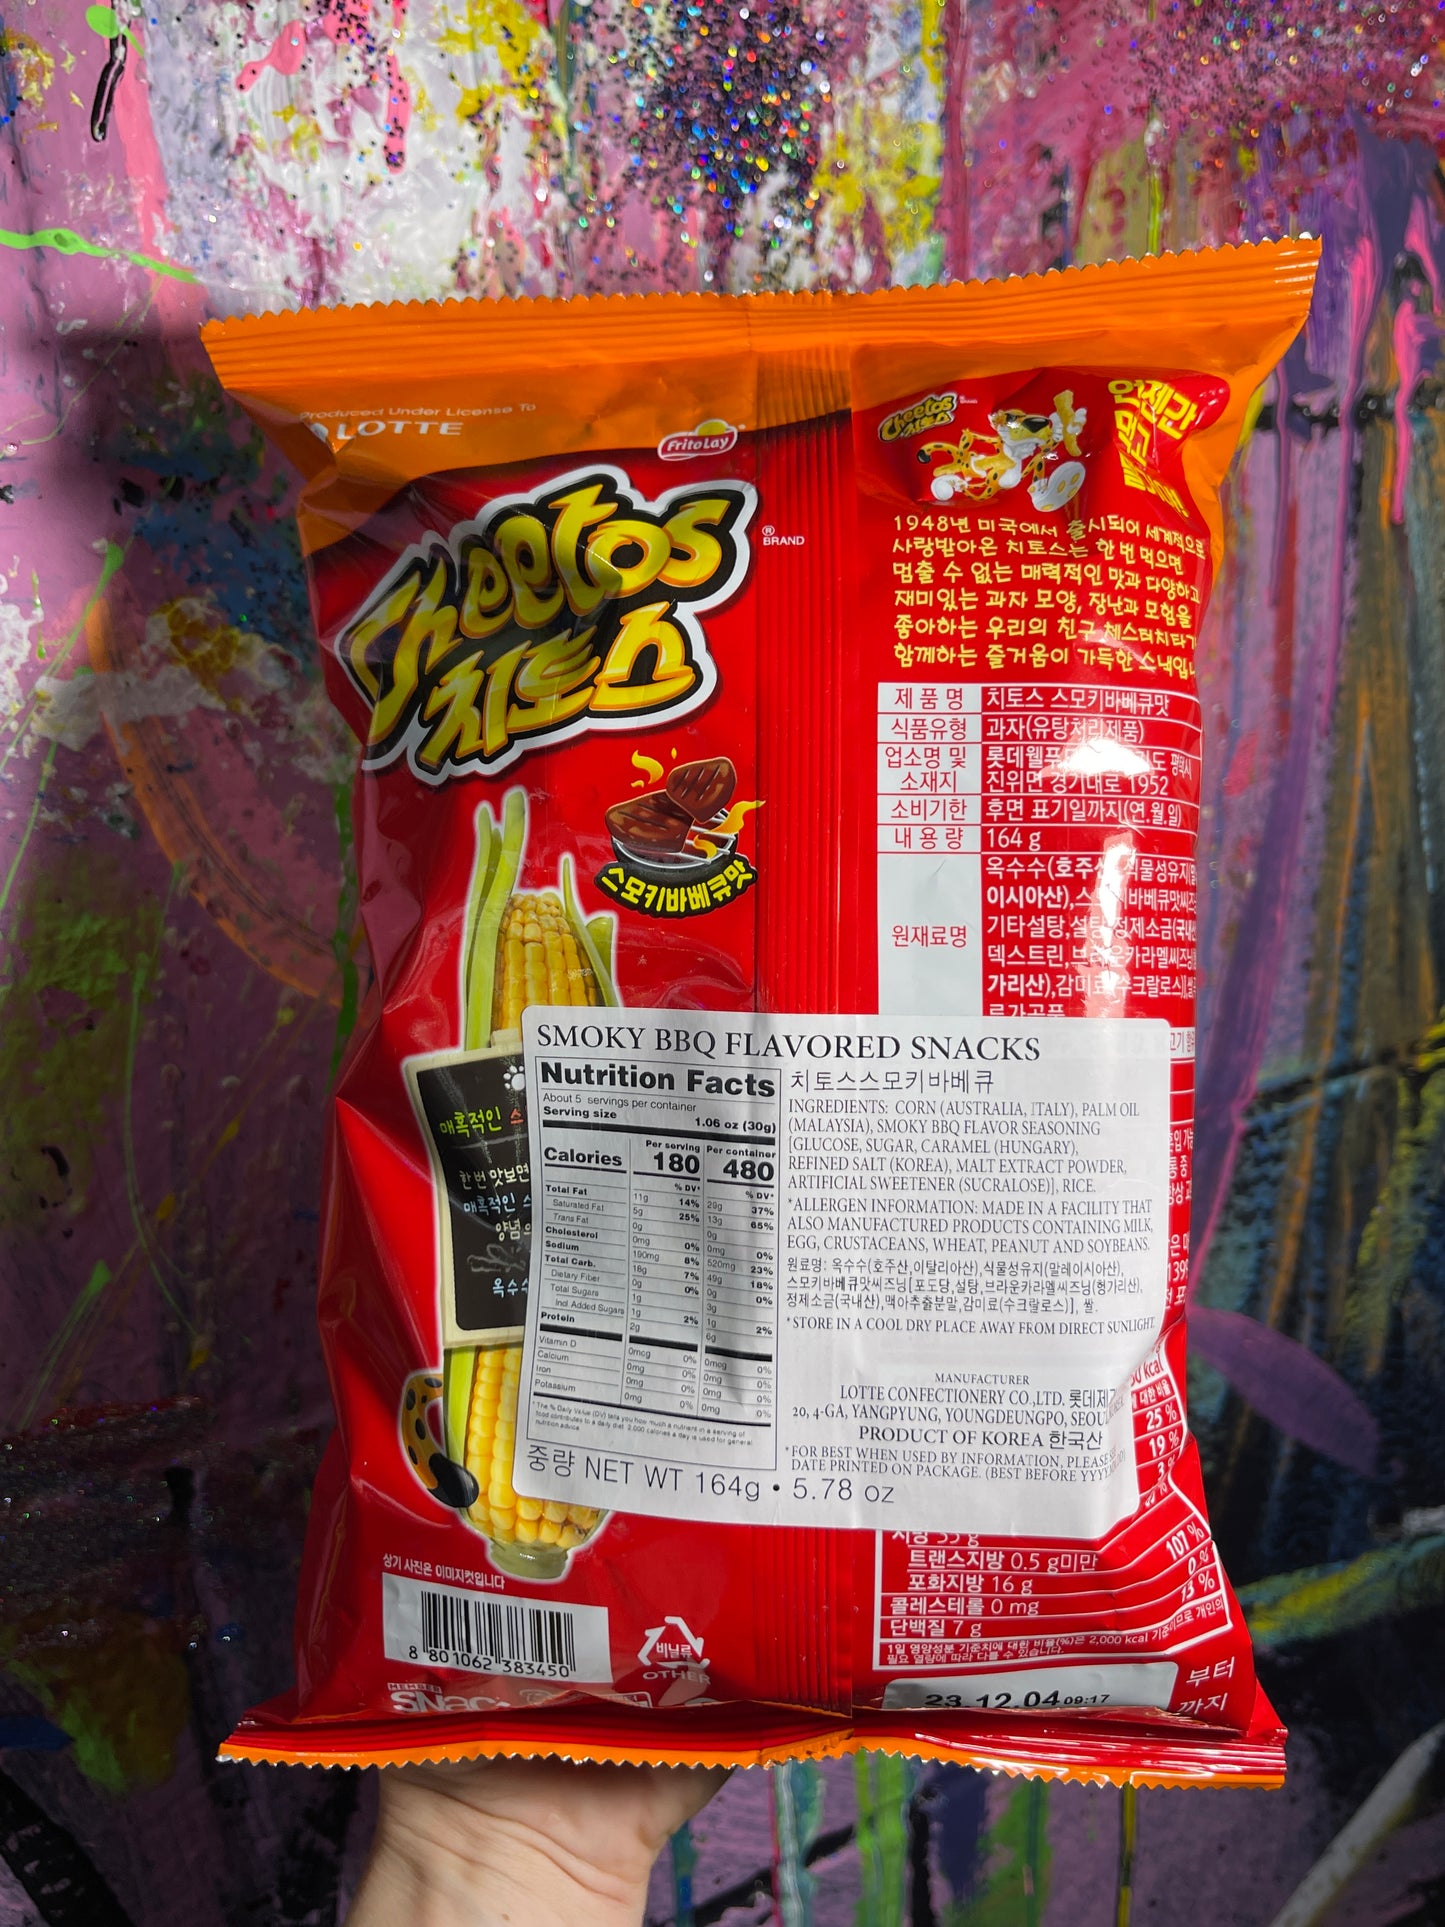 Chinese Cheetos Smoky BBQ Flavored